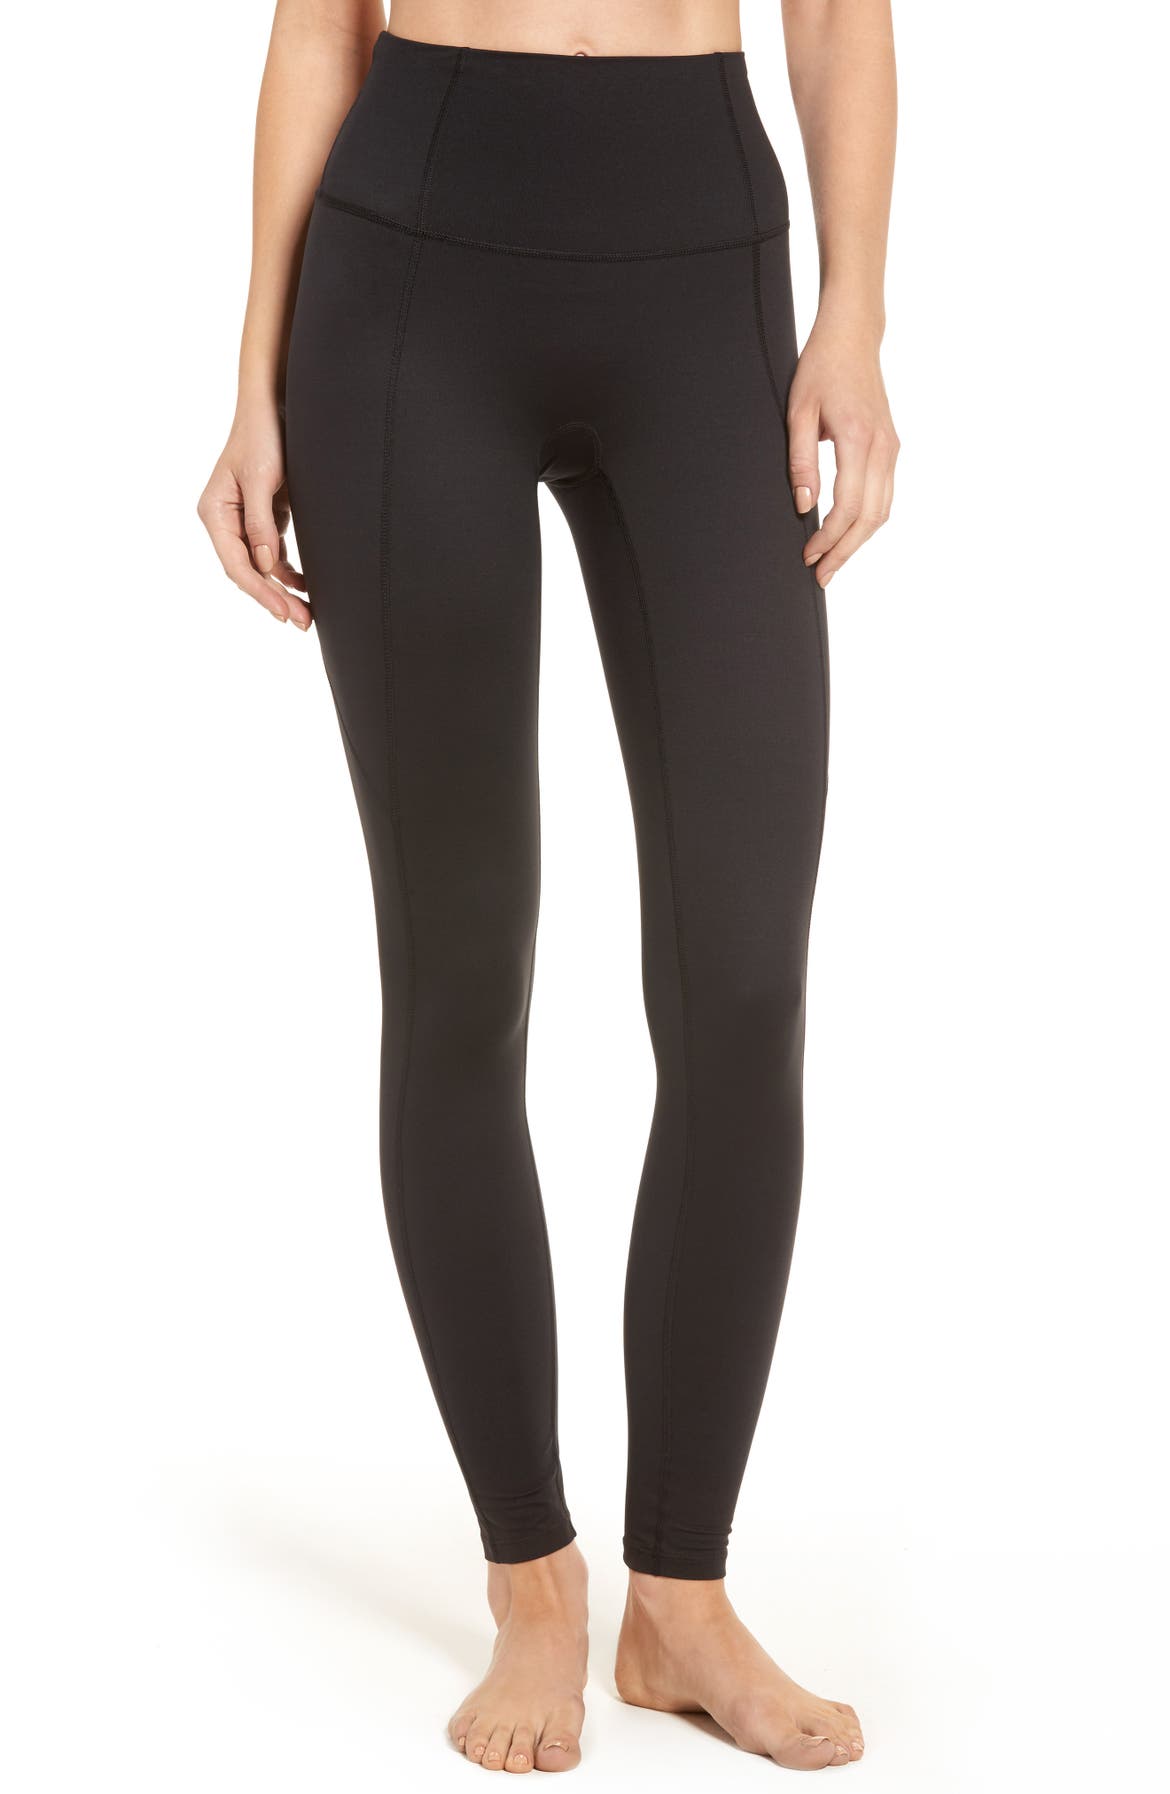 do spanx leggings stretch out strap